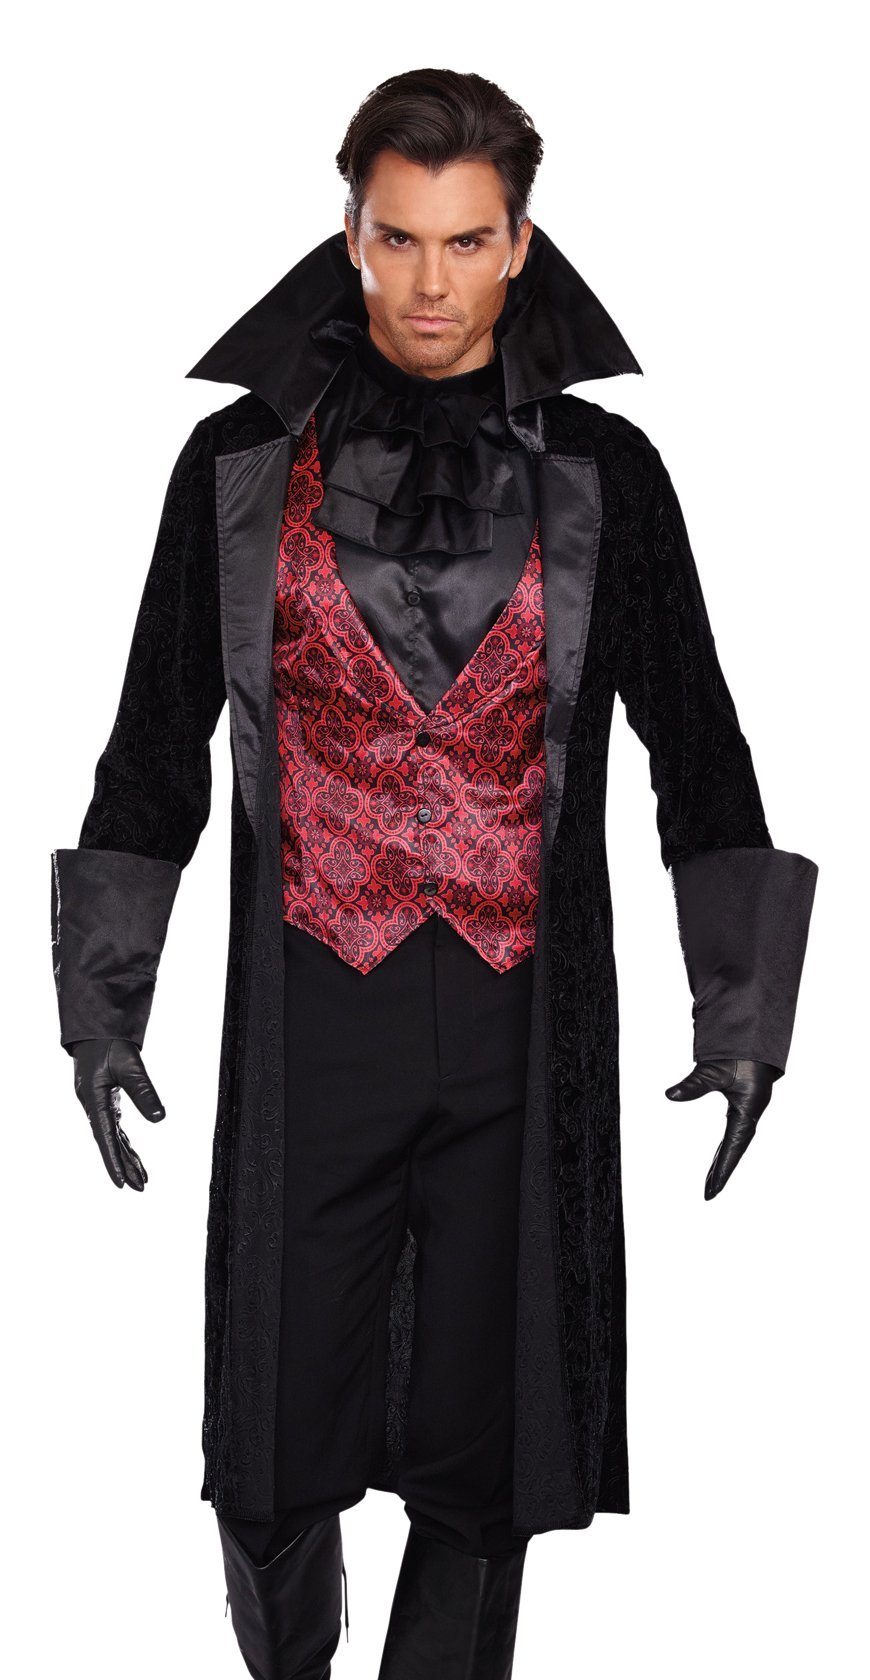 Dreamgirl Men's Bloody Handsome Costume, Black/Red, X-Large